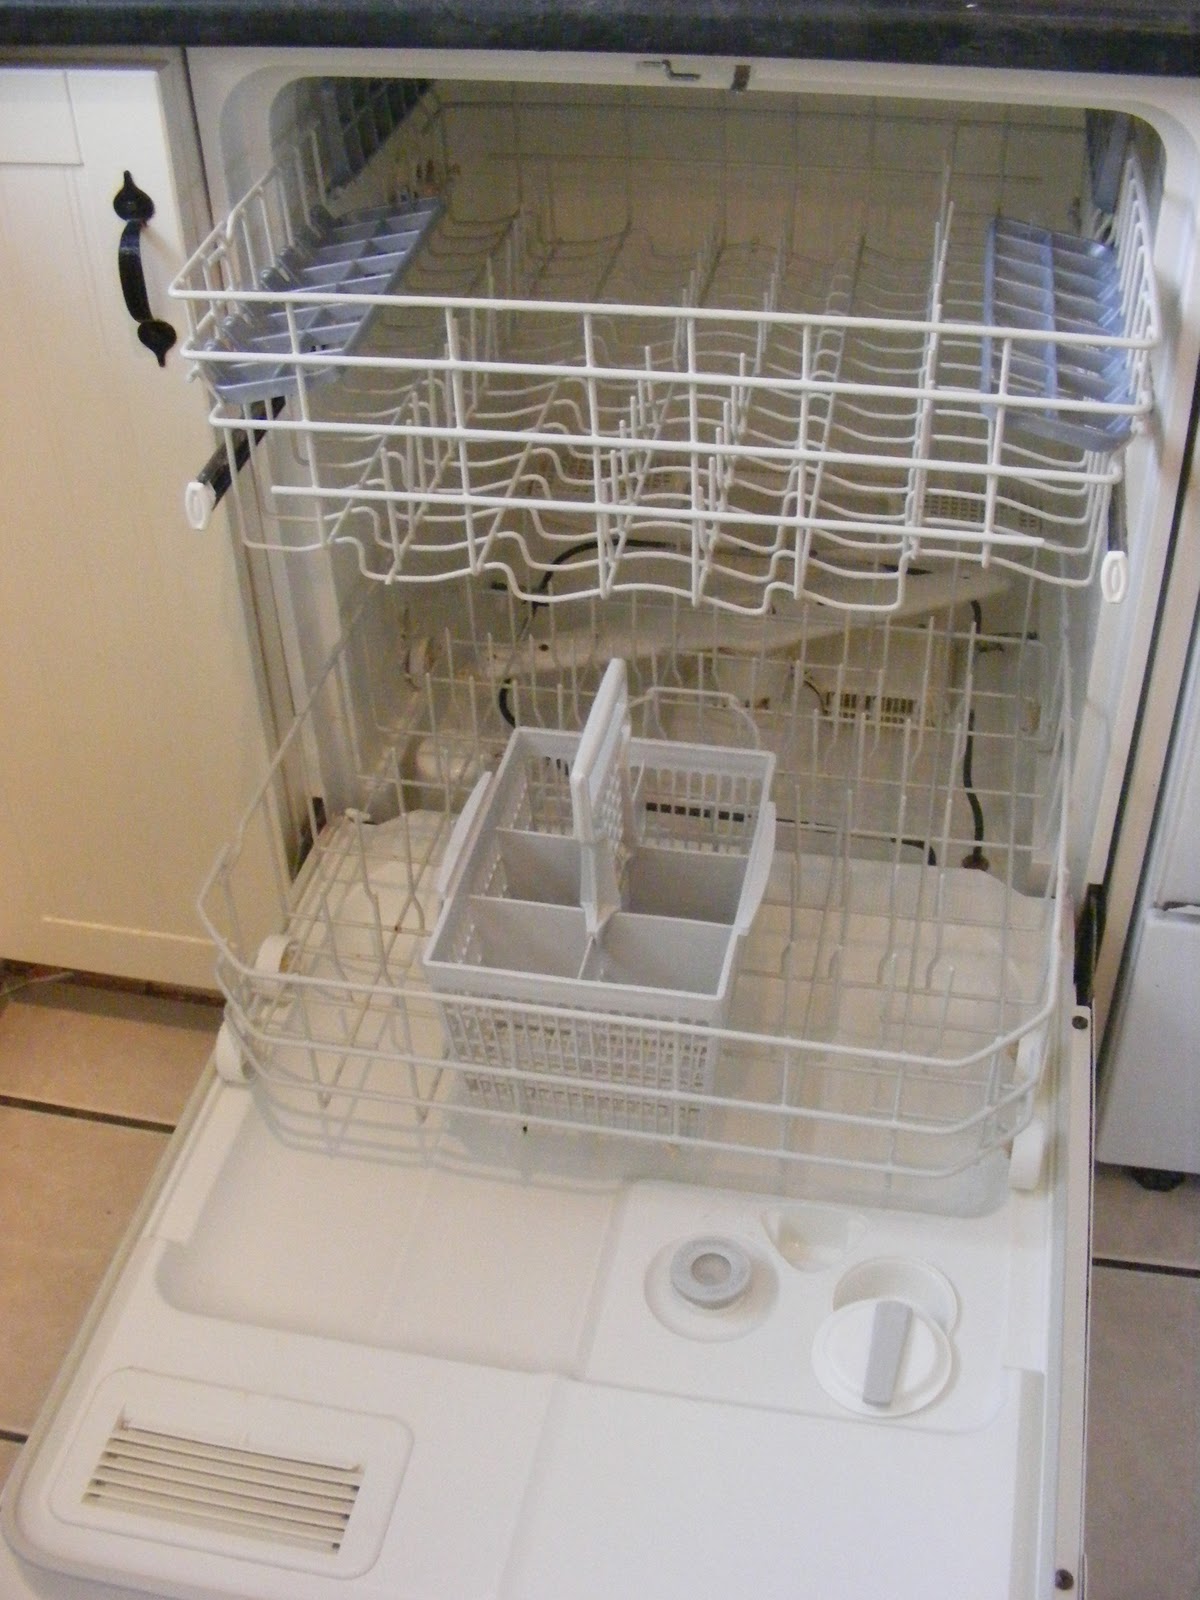 How To Clean Your Dishwasher Without Gagging Too Much The Complete Guide To Imperfect Homemaking